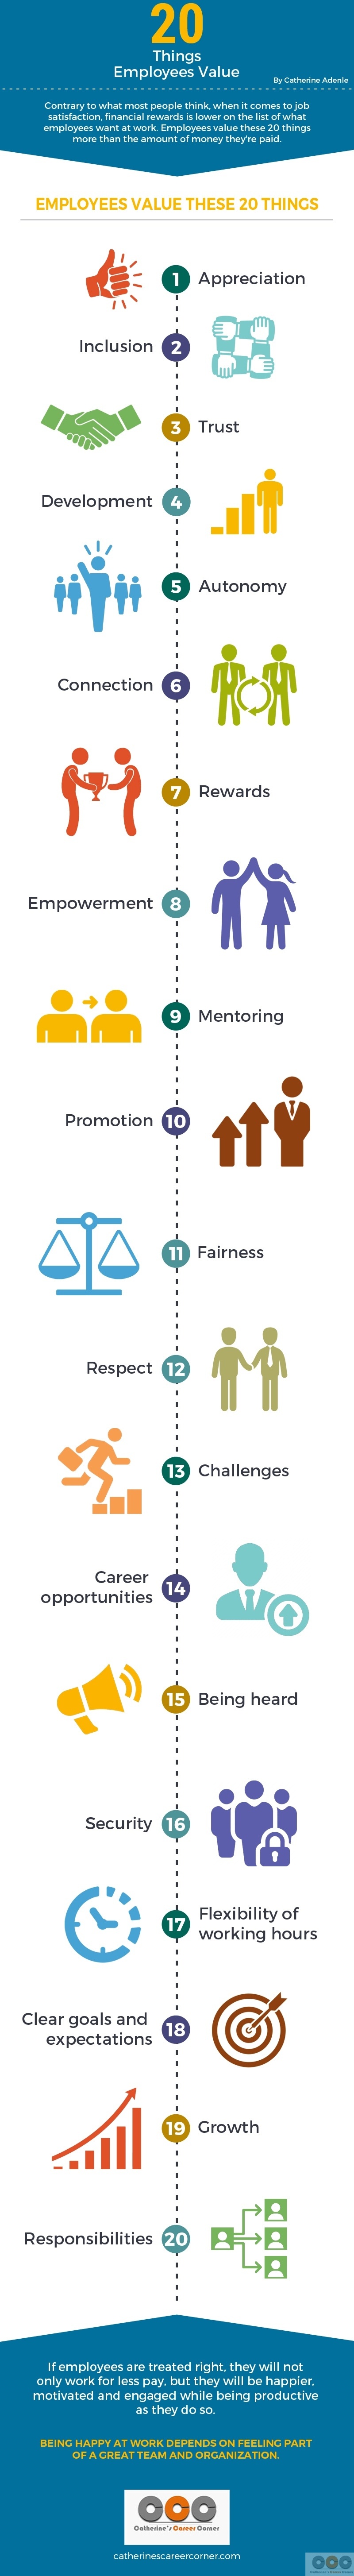 20 Things Employees Value (Infographic)